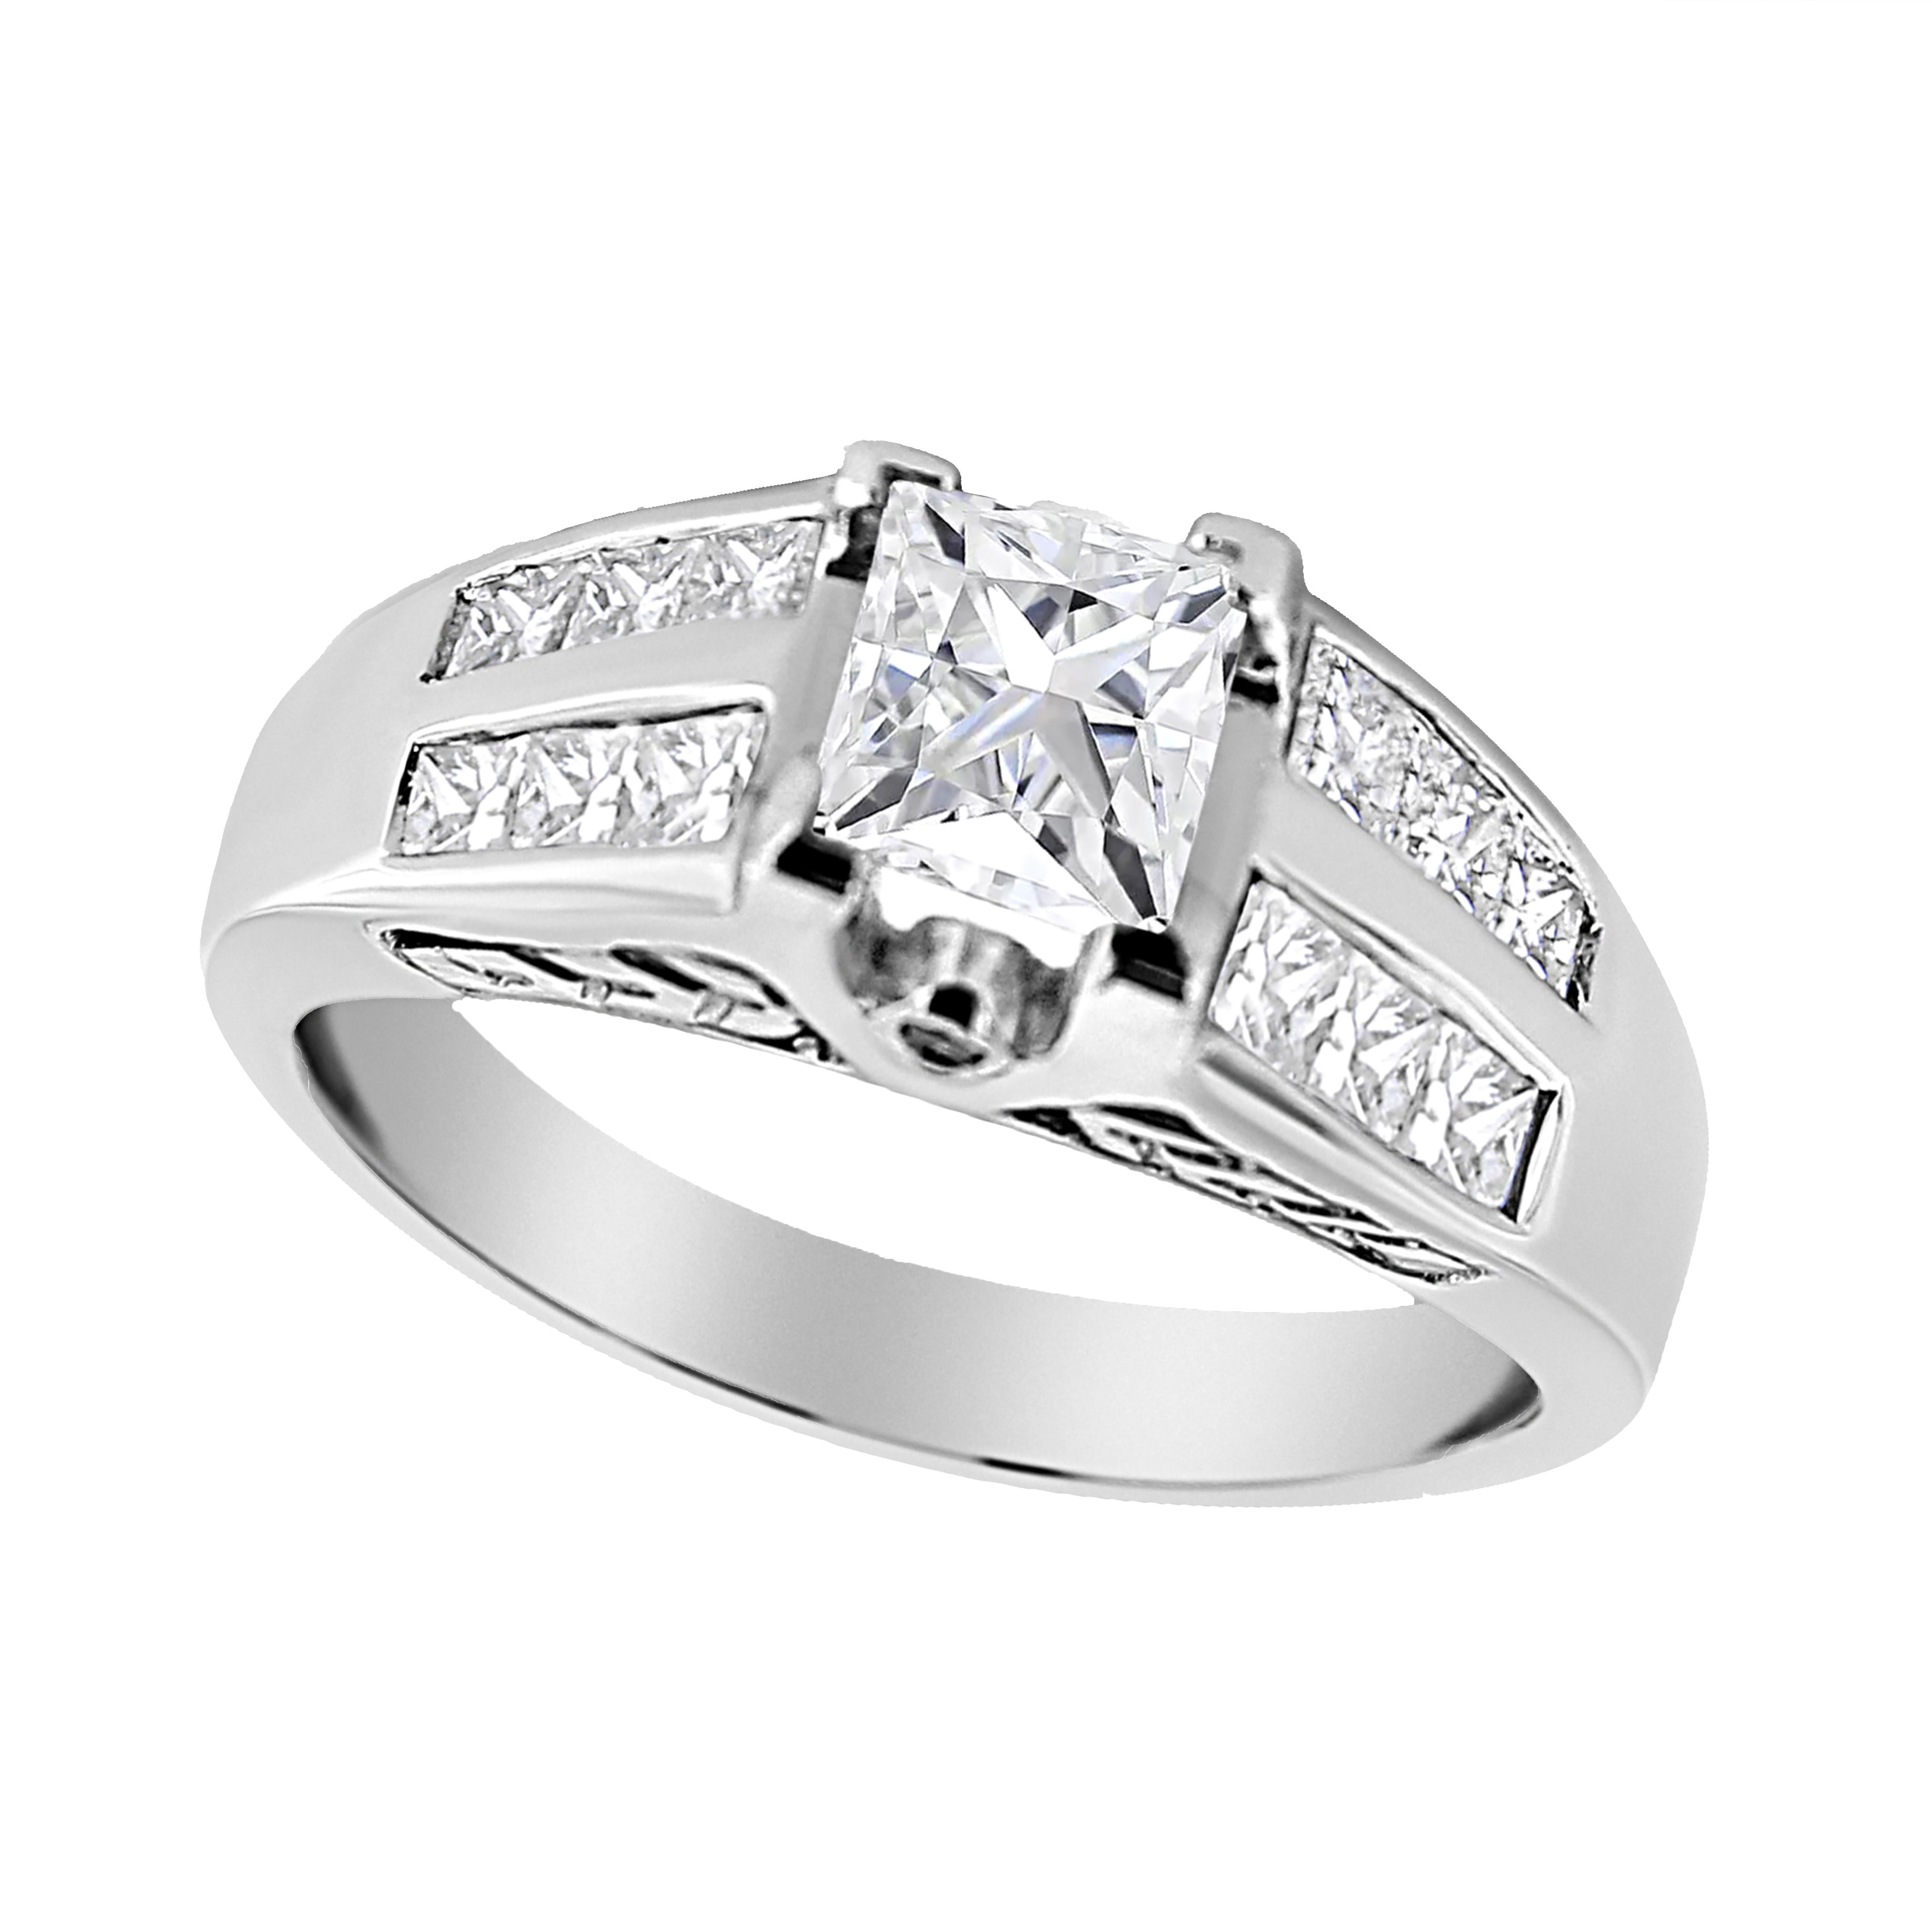 Adorn yourself with this bold 14k white gold ring. A sparkling 3/4 cttw princess-cut diamond sits at the center of this ring in a trendy invisible setting. The central stone is flanked by smaller princess and round-cut diamonds studded on the gold